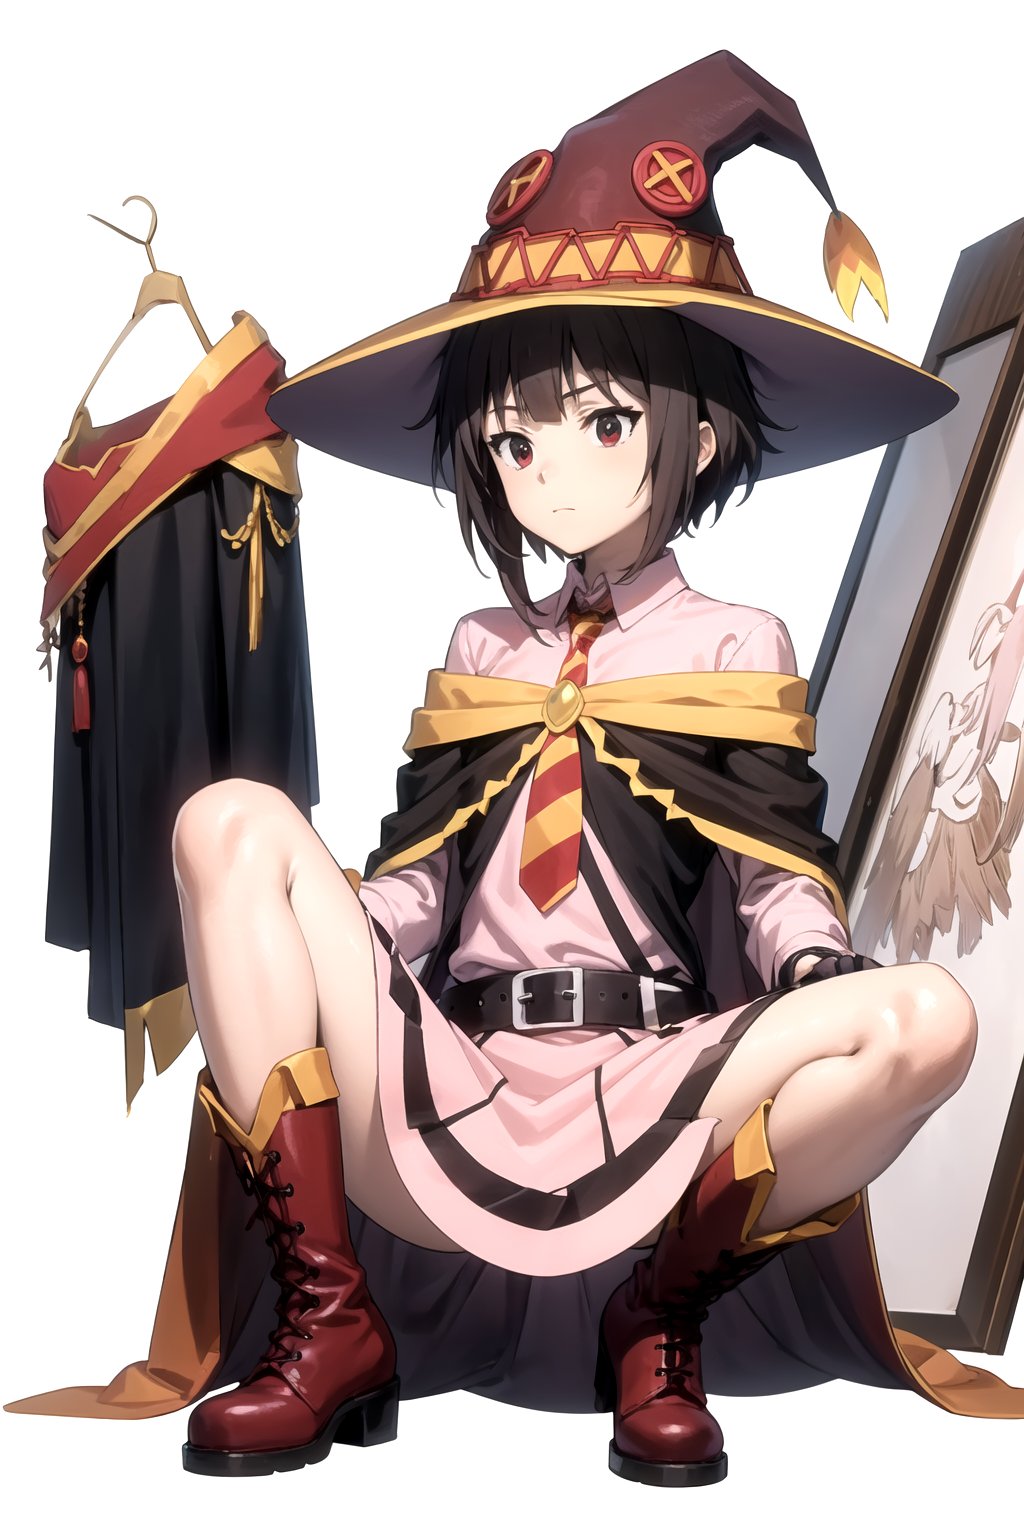 //Quality,
masterpiece, best quality
,//Character,
1girl, solo
,//Fashion, 
,//Background,
white_background
,//Others,
,spread legs, 
Megumin, hat, witch hat, boots, fingerless gloves, dress, belt, long sleeves, pink dress, black gloves, red necktie, pink skirt, shirt, black cape,